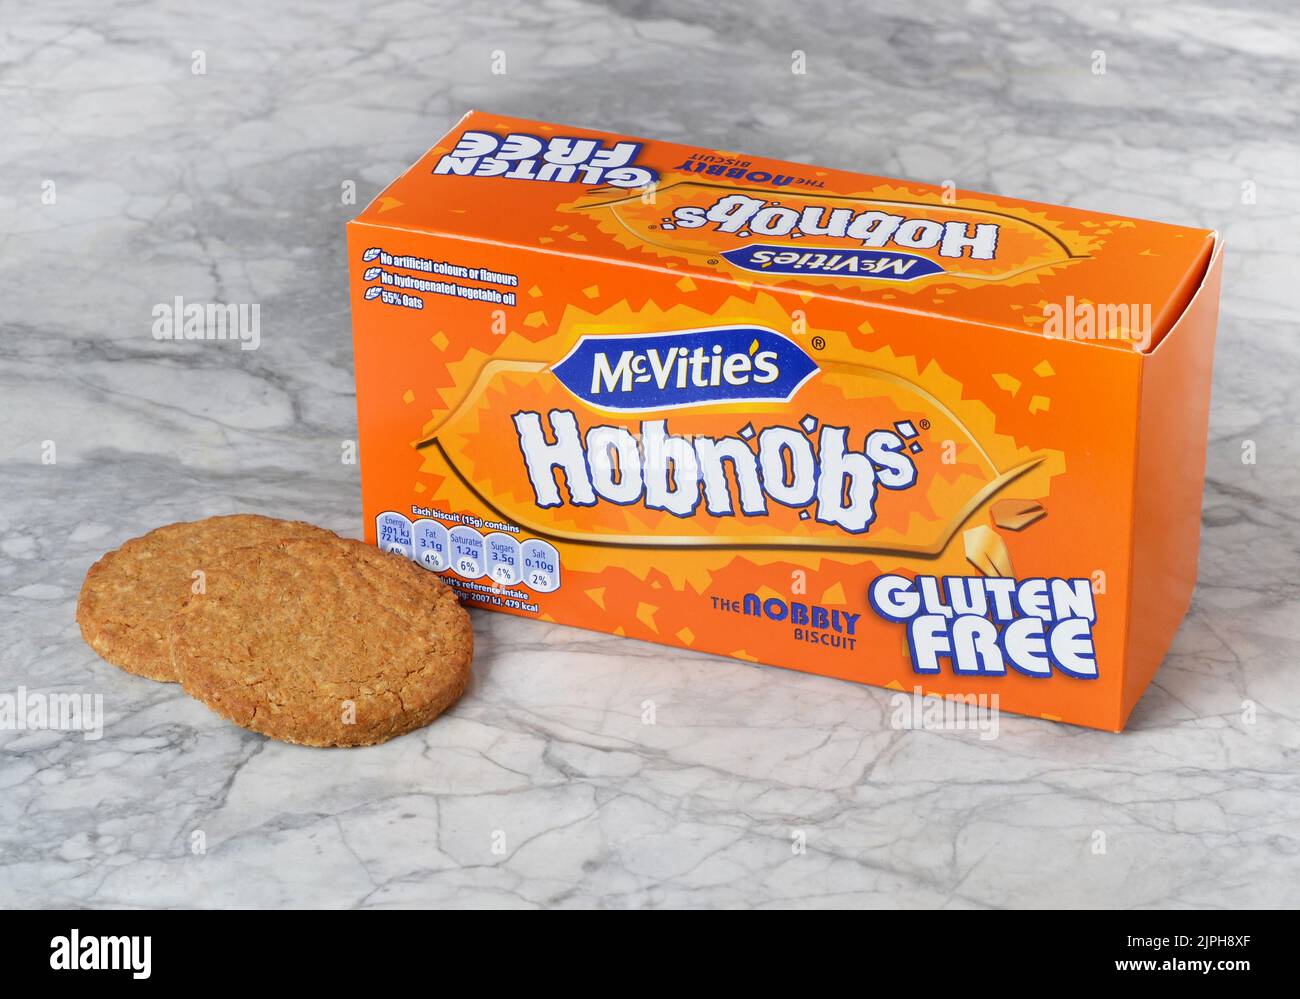 Pack shot of McVities Gluten Free Hobnob's biscuits showing the packaging box with two biscuits in front of the box Stock Photo